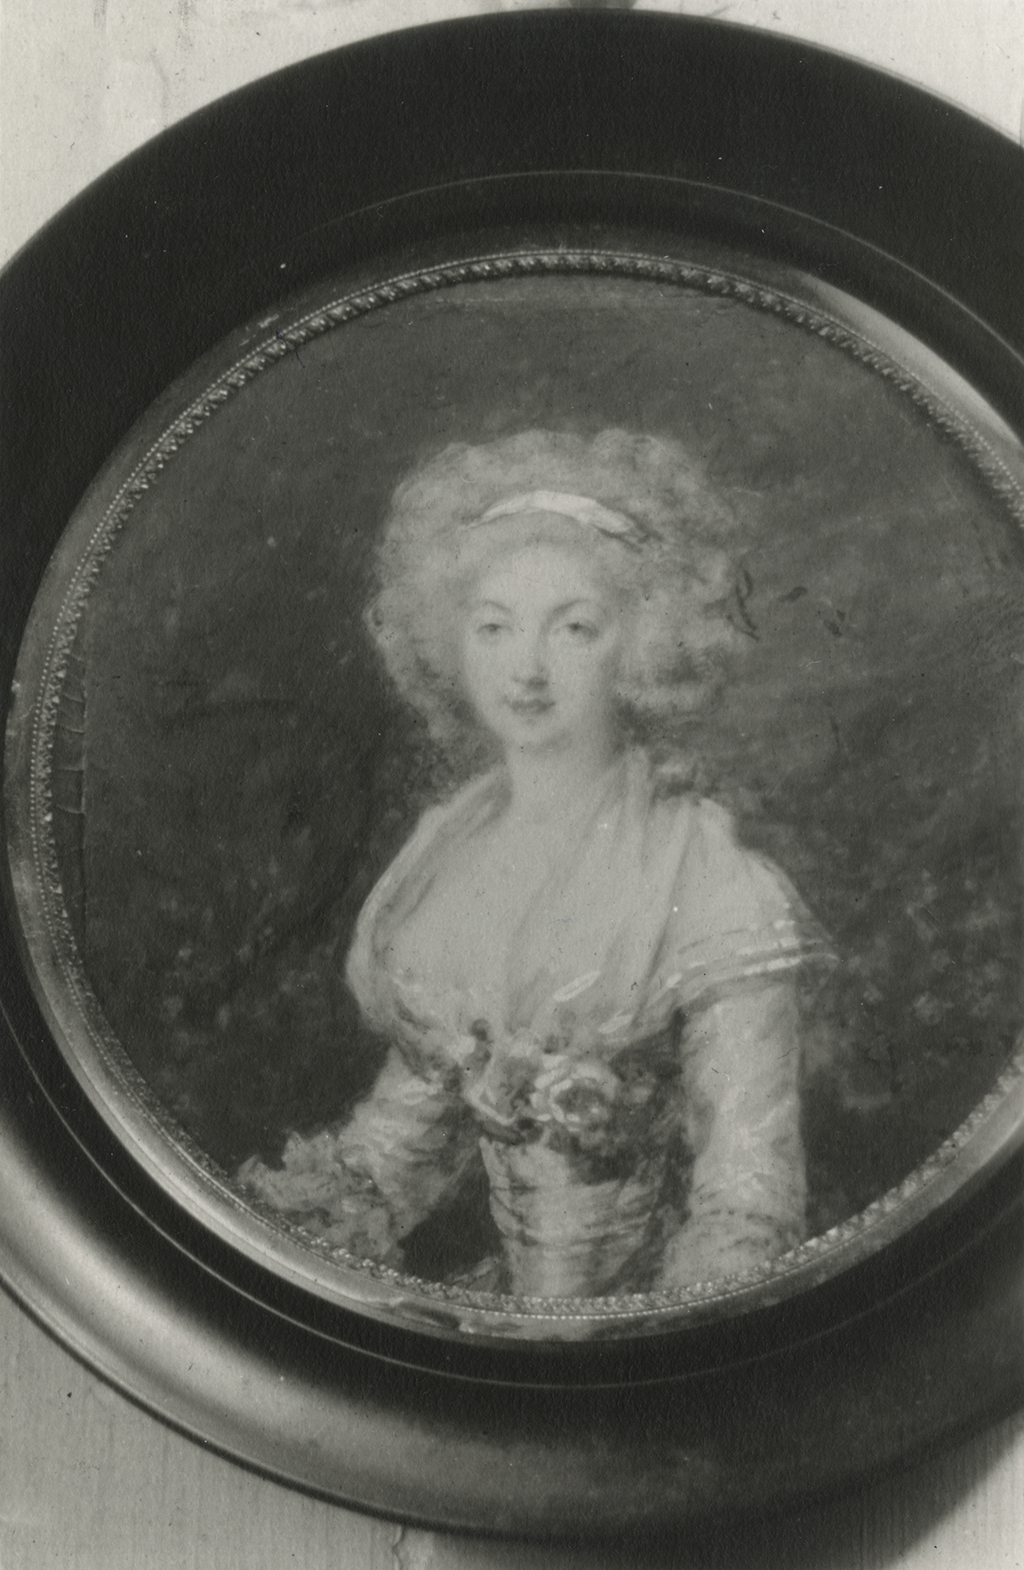 A black and white photograph of a framed miniature painting of a woman. She is shown from the waist up and has large curly hair tied with a headband. She wears a dress with a cloth that covers her shoulder and flowers at her bosom.